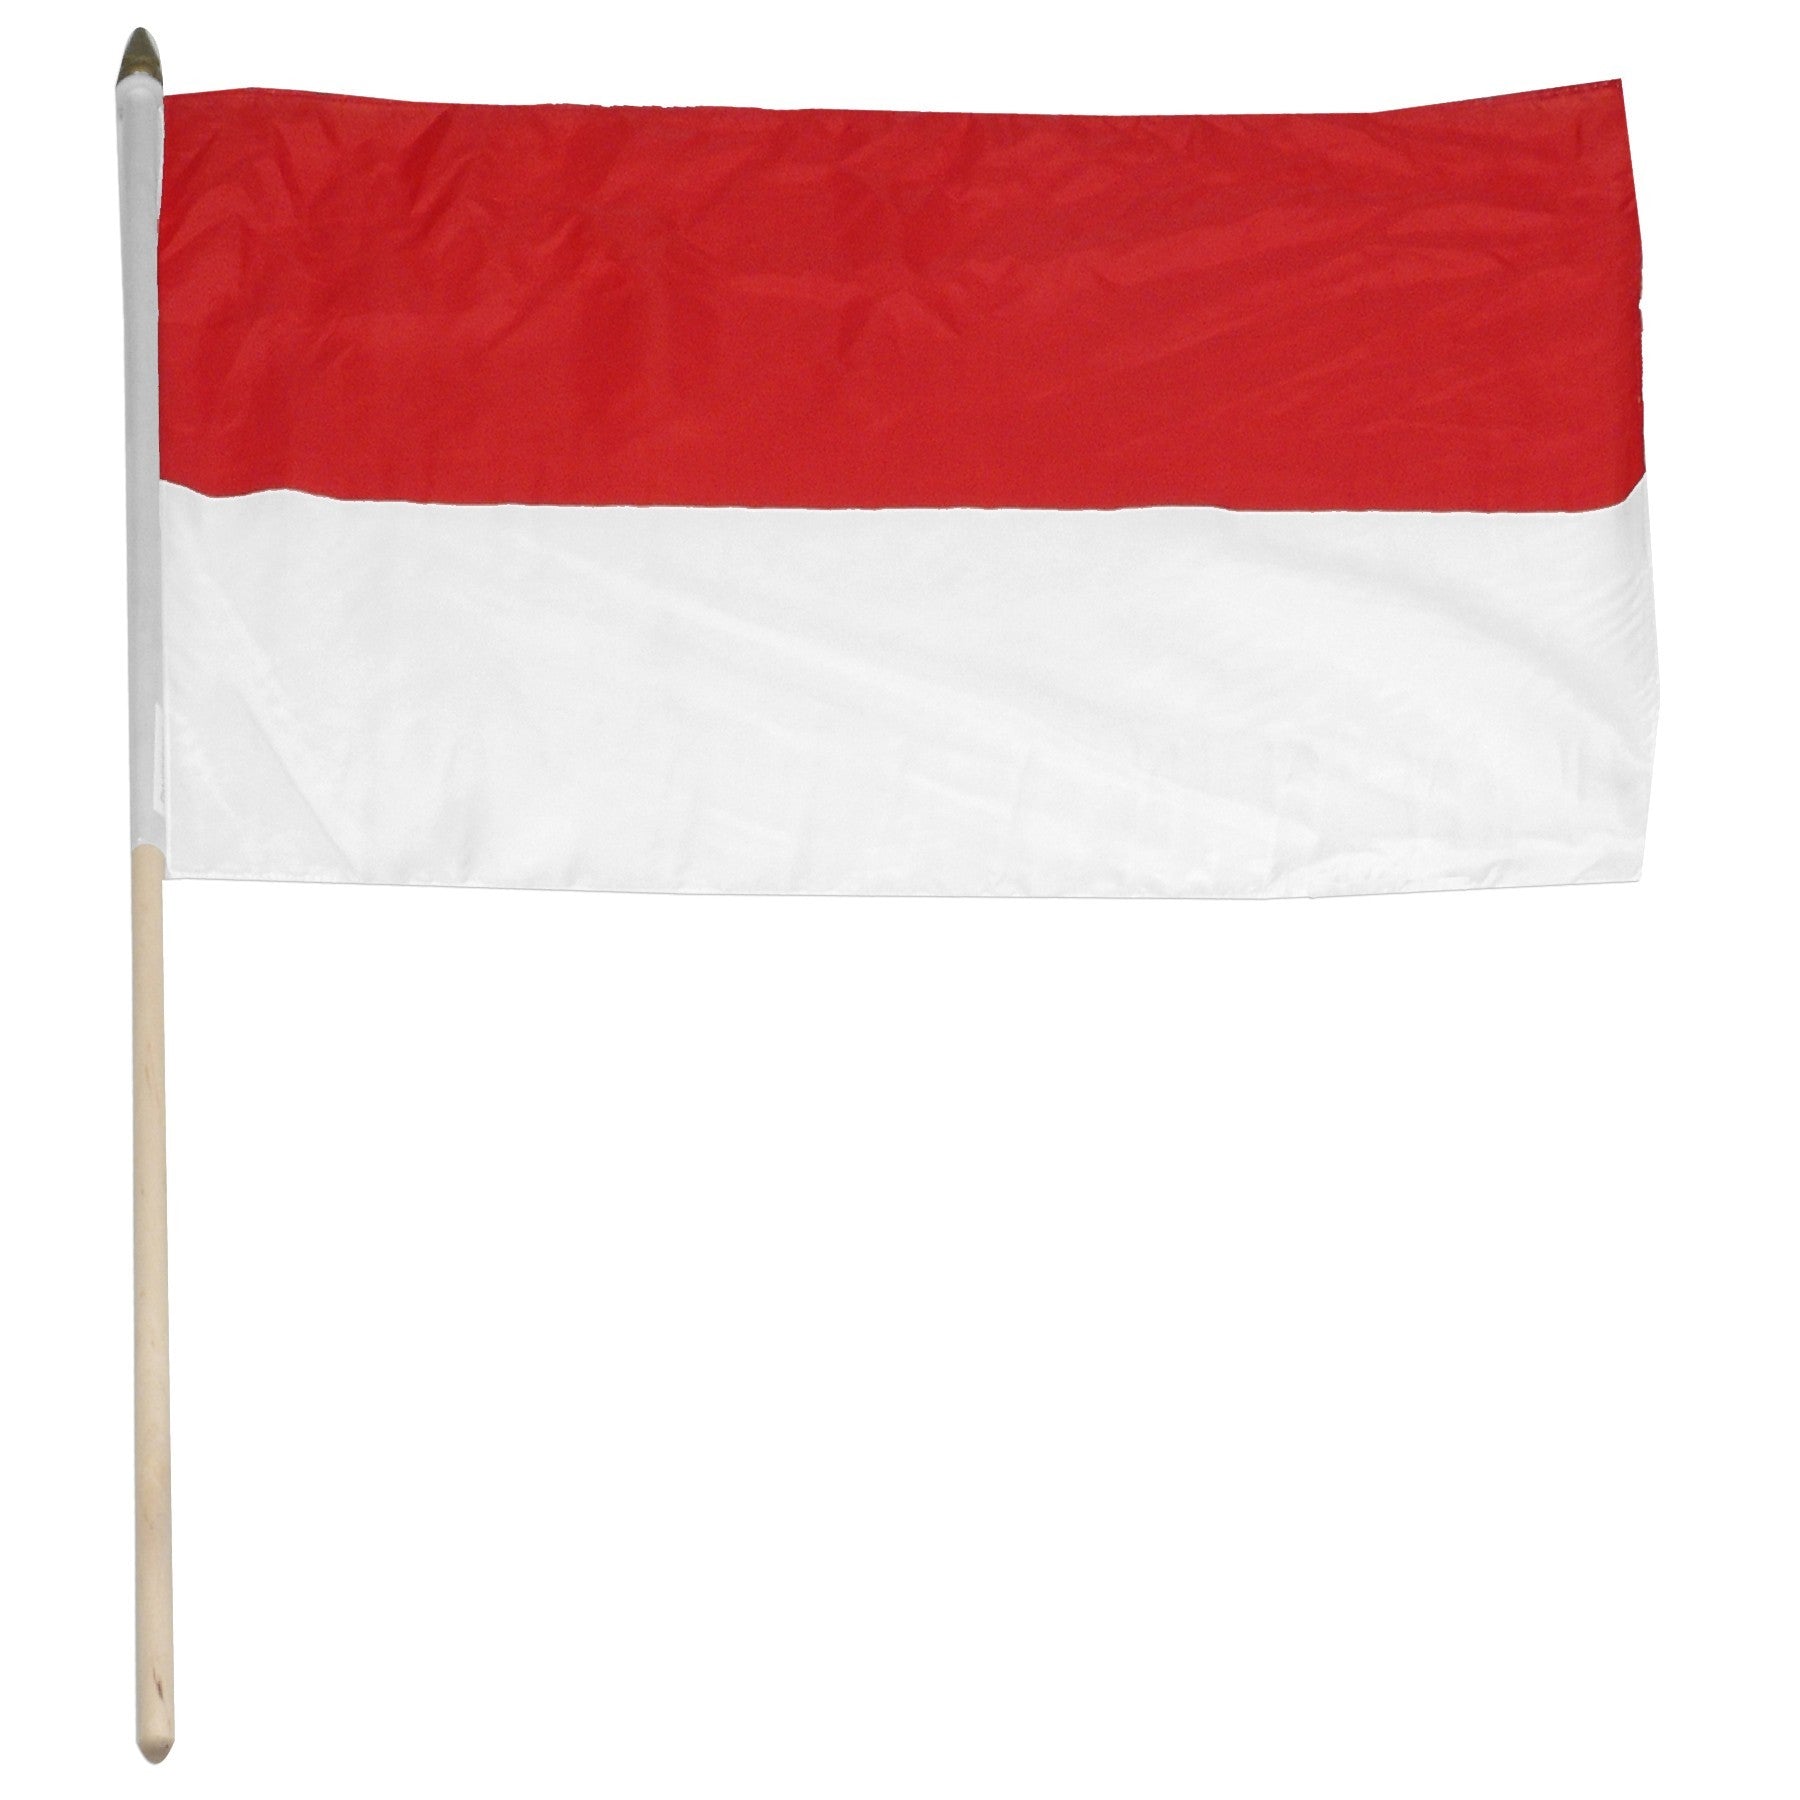 Indonesia Country Flags For Sale by 1-800 Flags